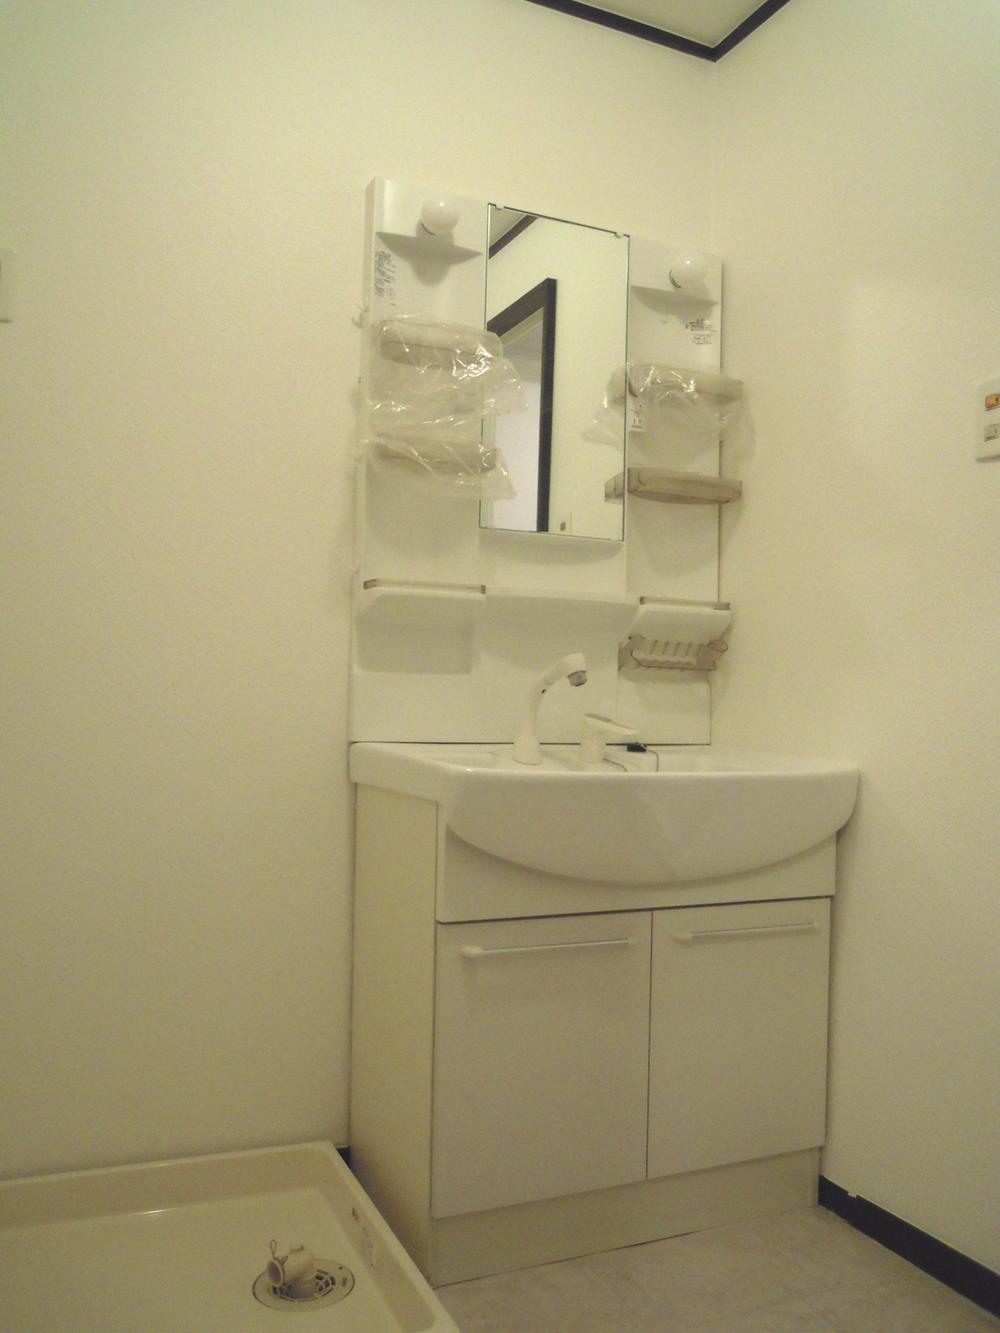 Wash basin, toilet. It is simple and modern washroom in which the white tones.